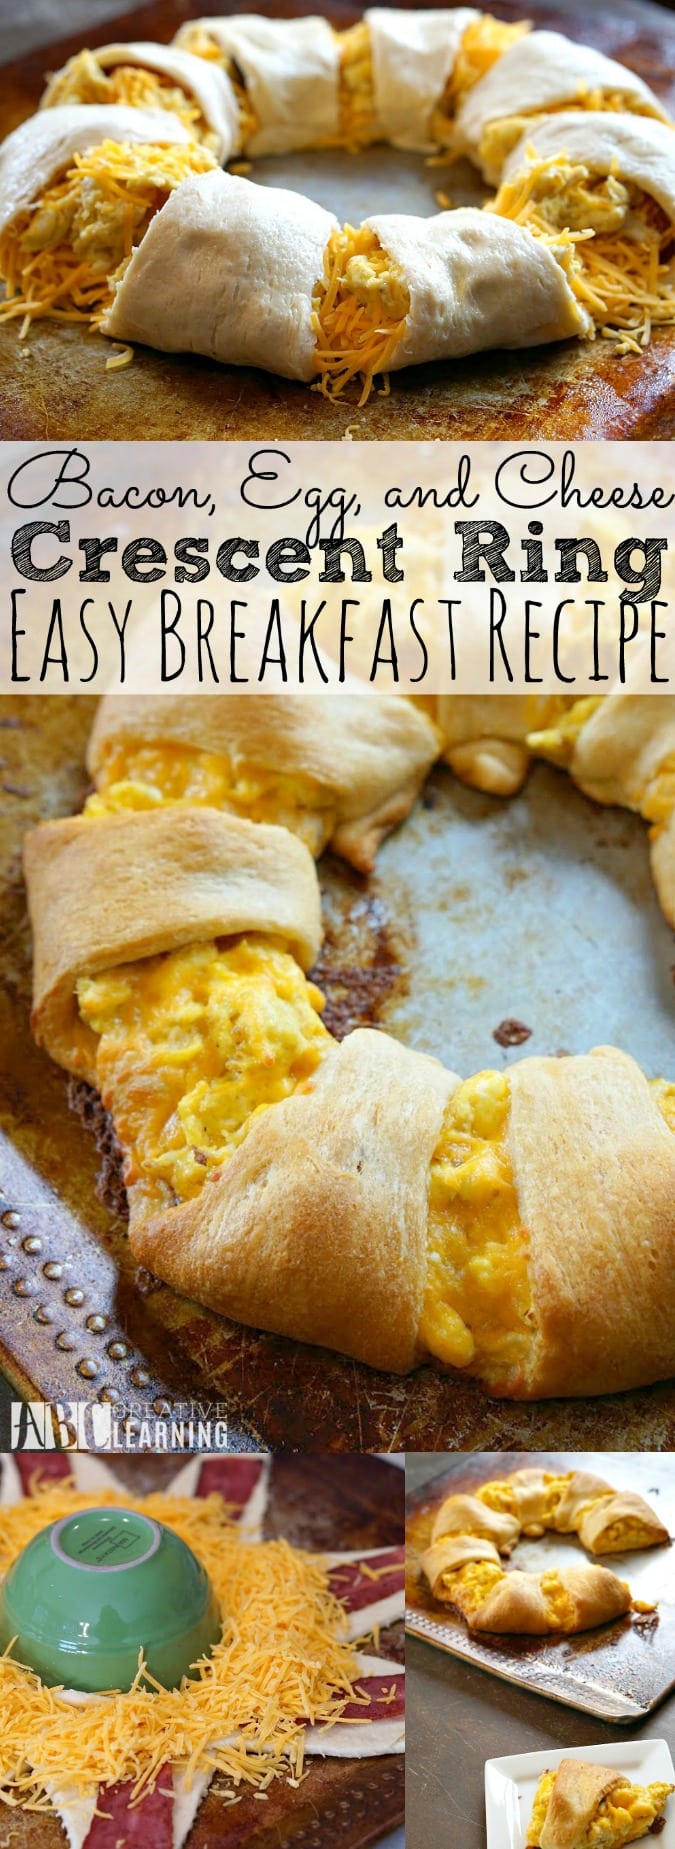 https://simplytodaylife.com/wp-content/uploads/2016/01/Bacon-Egg-and-Cheese-Crescent-Ring-Recipe-Easy-Breakfast-Recipes-abccreativelearning.com_.jpg